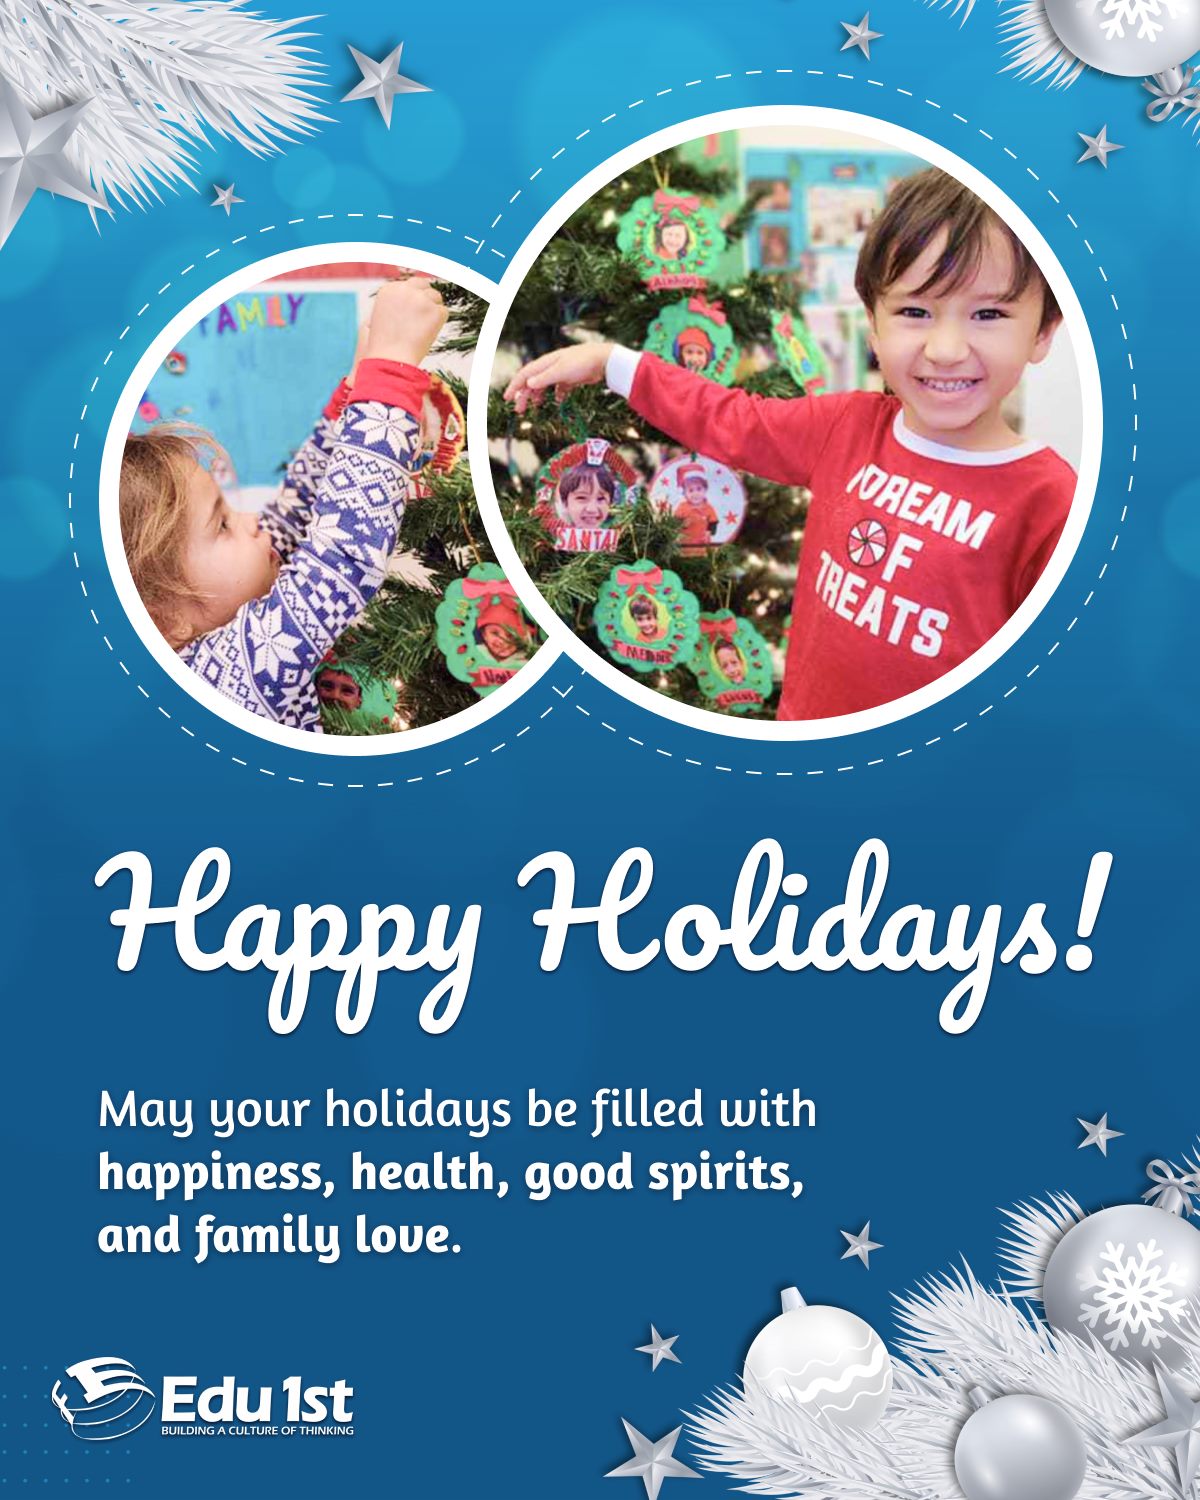 During this Holiday Season, our thoughts turn gratefully to all of you who have contributed to our school's success. In this spirit, we say, simply but sincerely . . ."Thank You and Best Wishes for the Holidays and a Happy New Year."